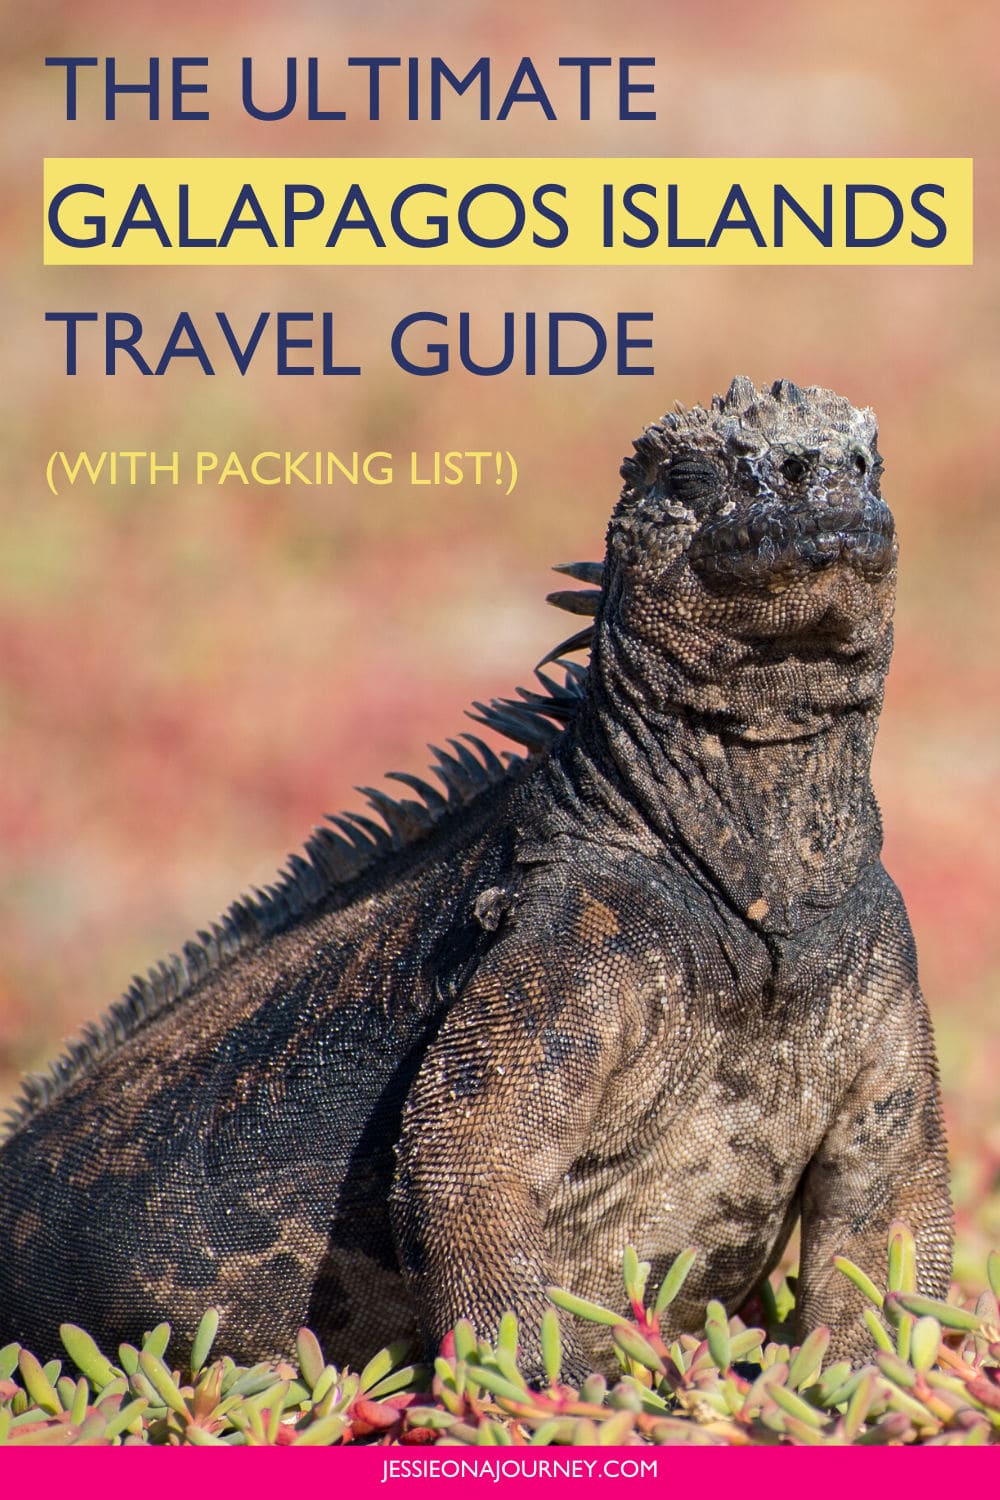 The Ultimate Galapagos Islands Travel Guide